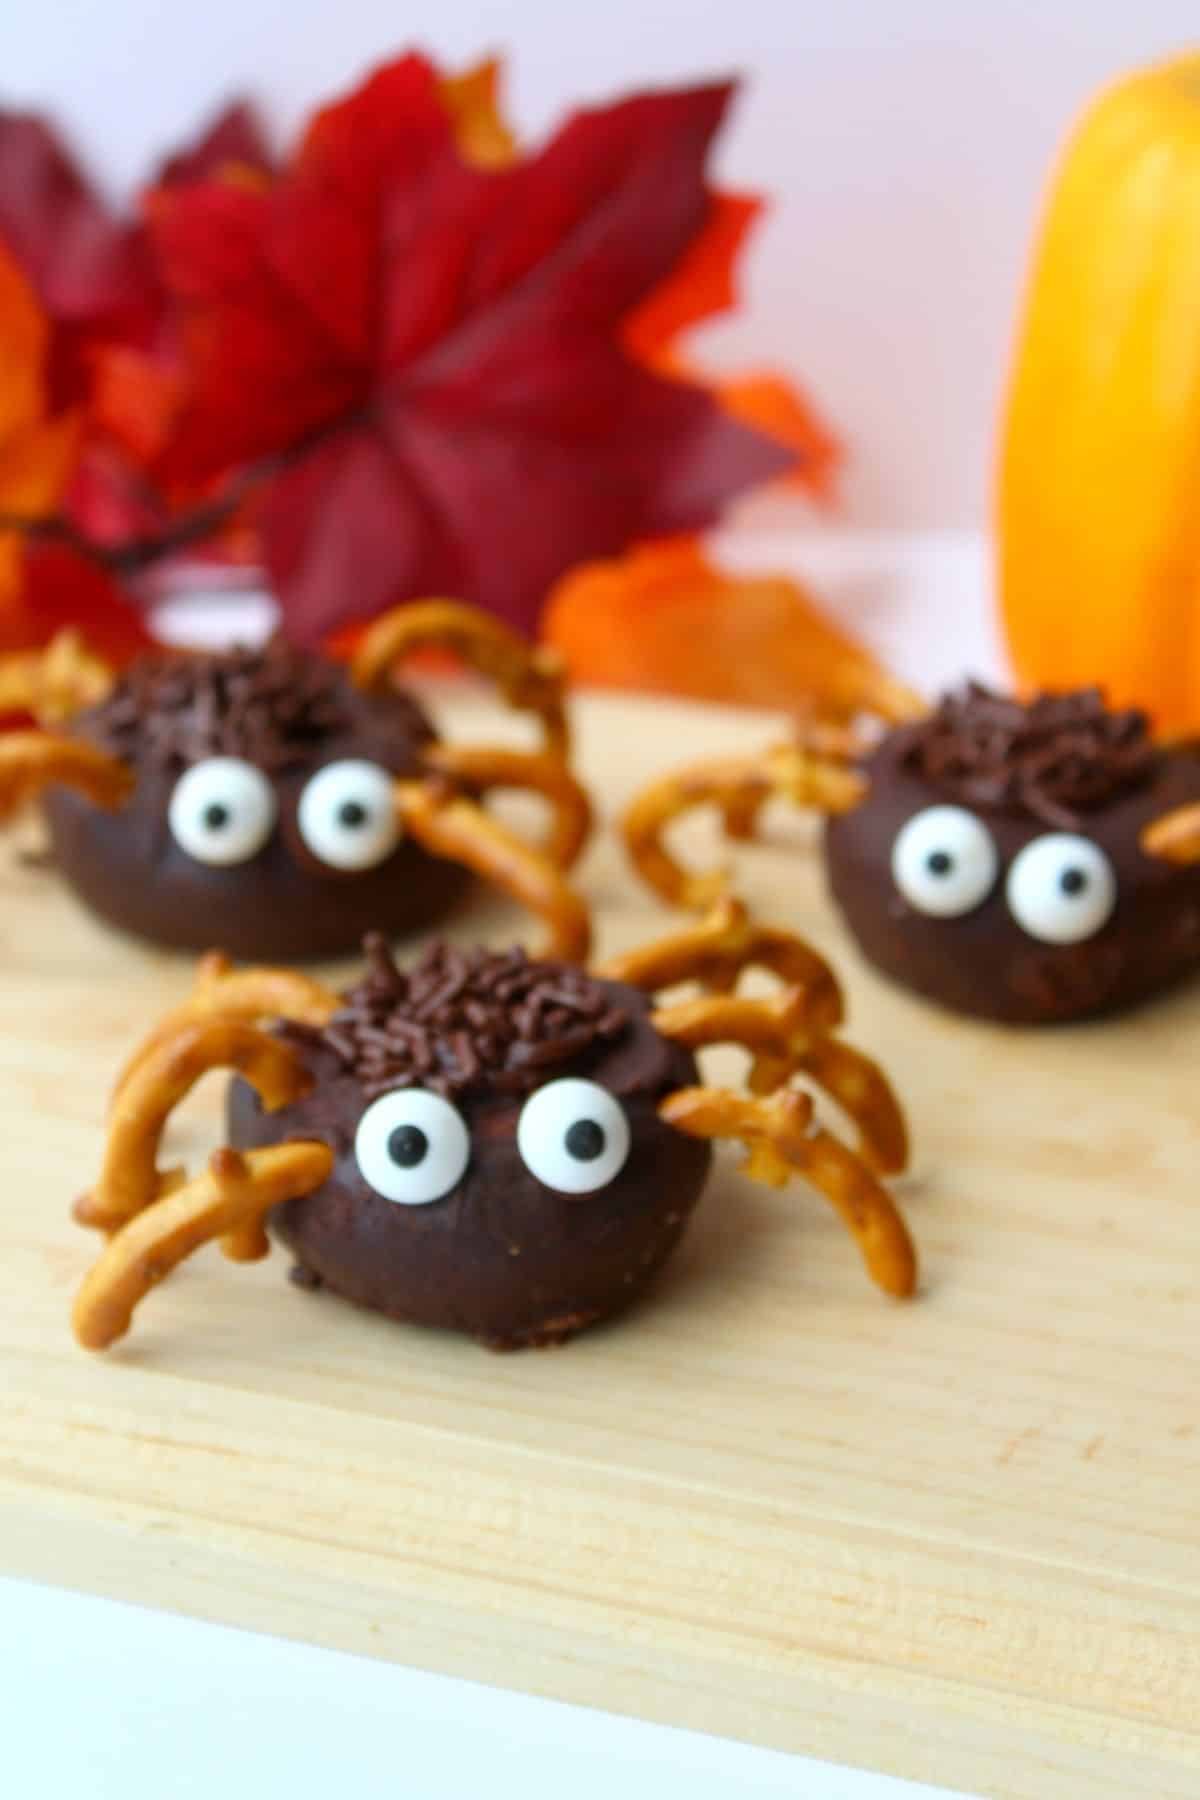 Mini chocolate spiders on a wooden cutting board.